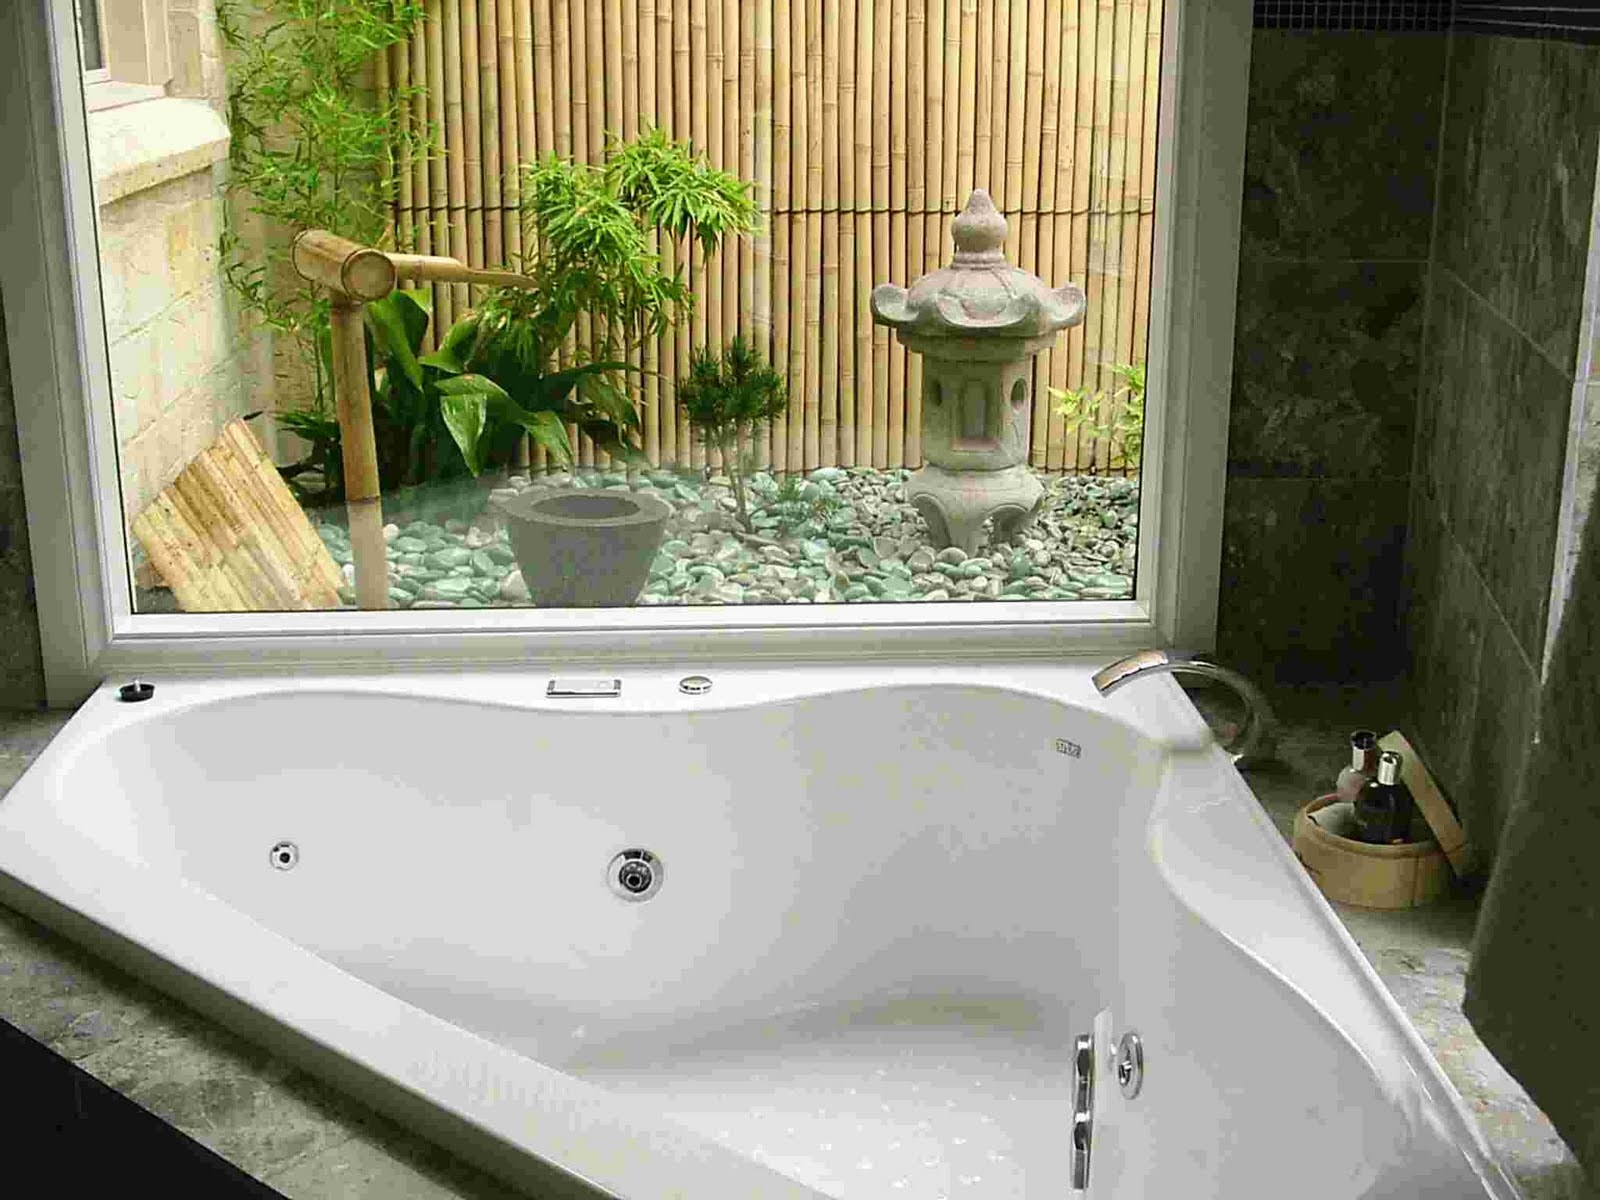 bathroom-chic-contemporary-white-jacuzzi-bathtub-corner-with-exotic-japanese-garden-view-and-cool-bamboo-fence-bathrooms-with-jacuzzi-designs-inspiratio